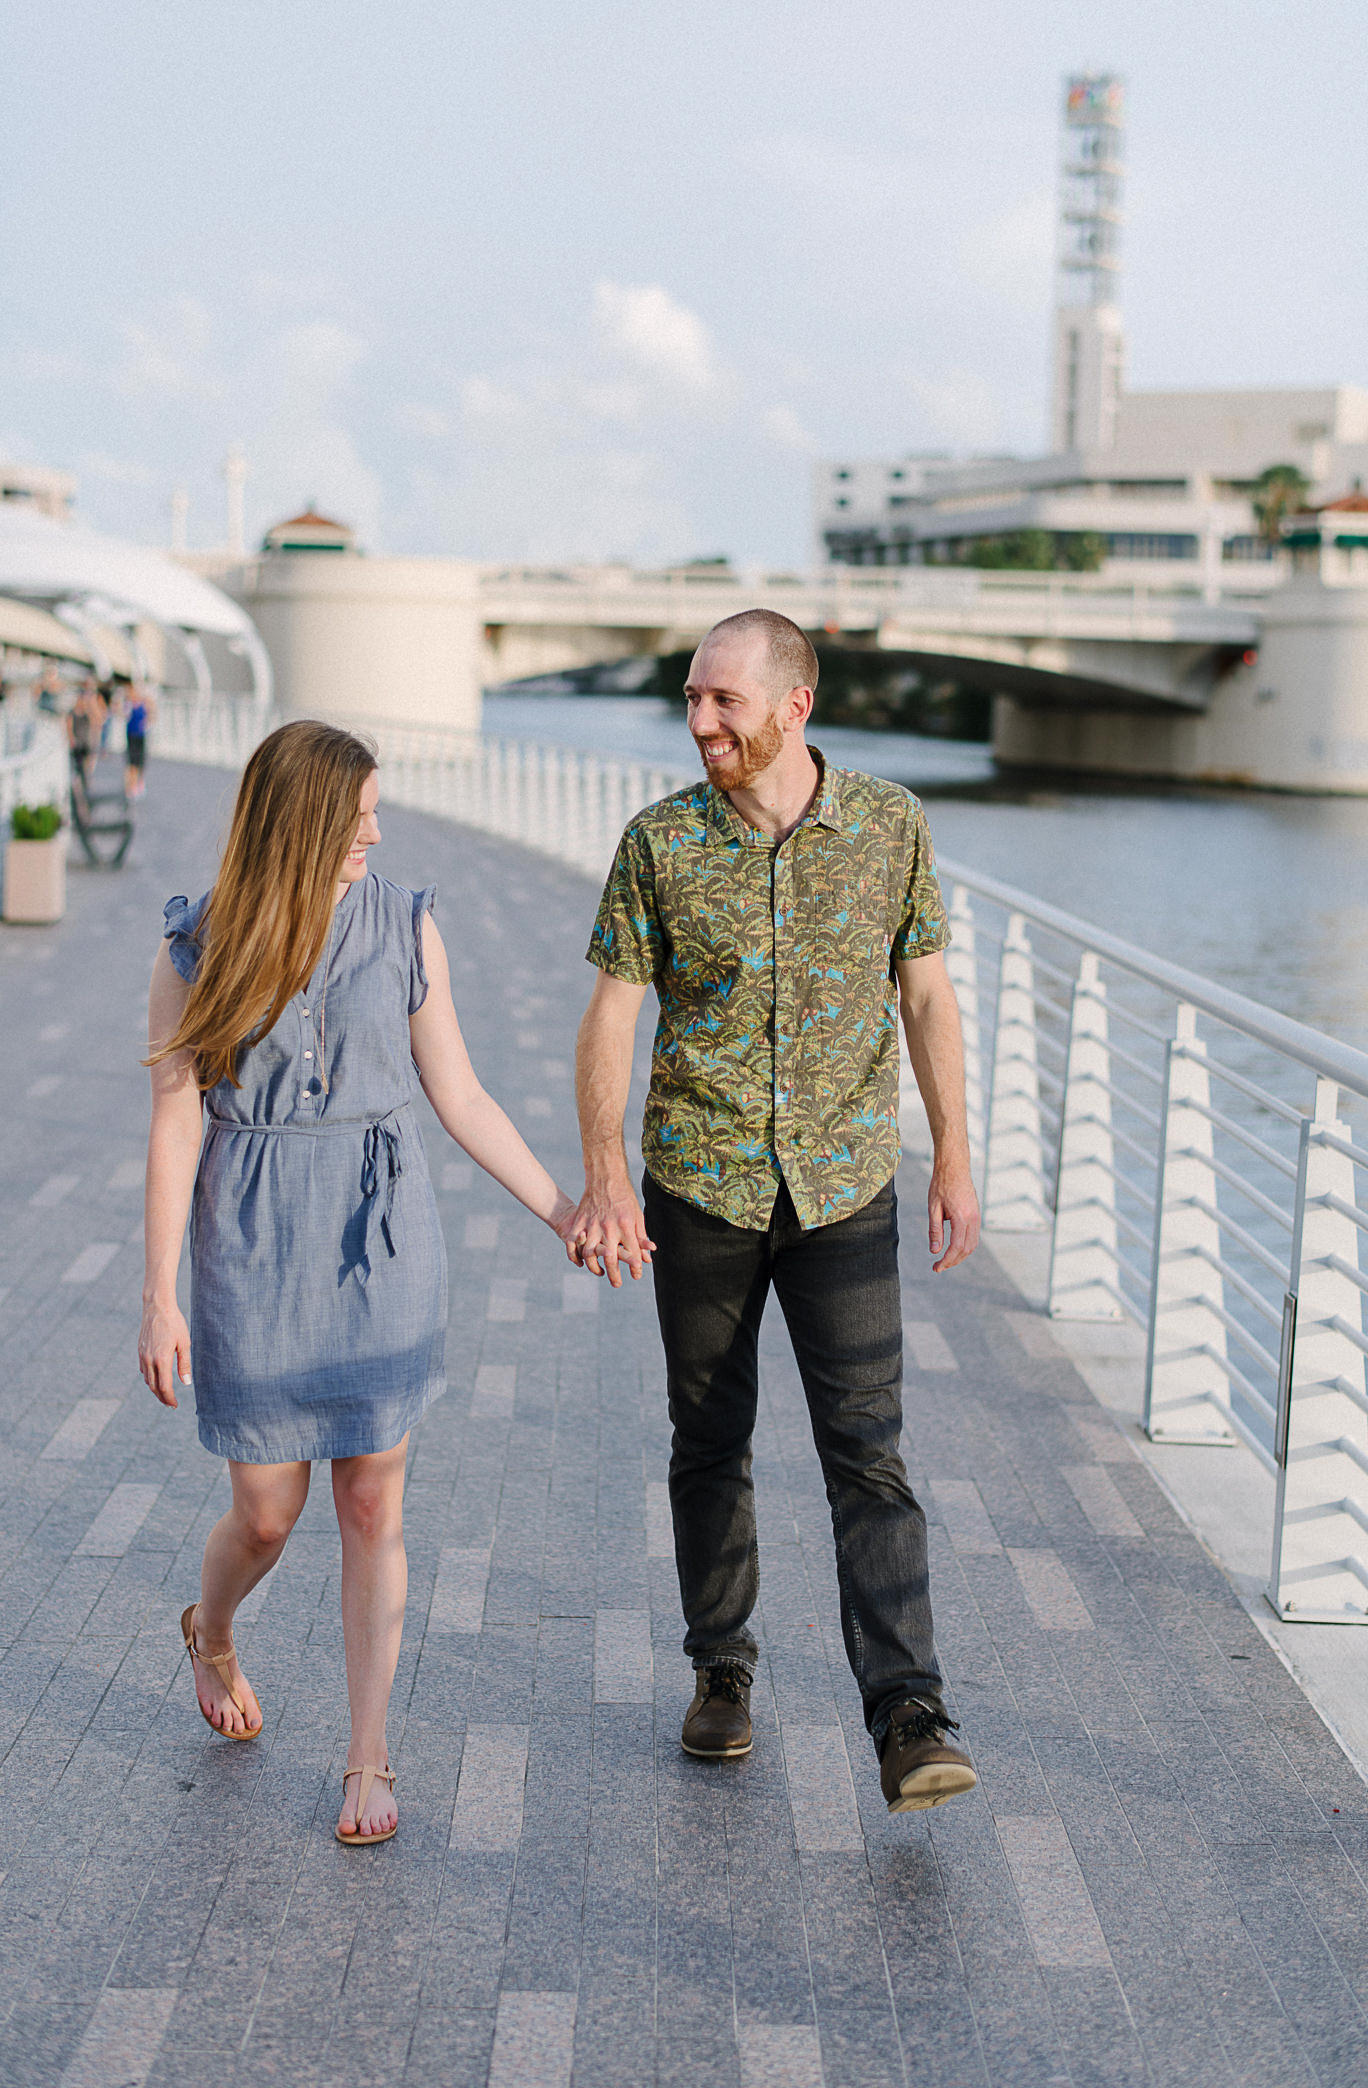 Dowtown Tampa Engagement Session in the City